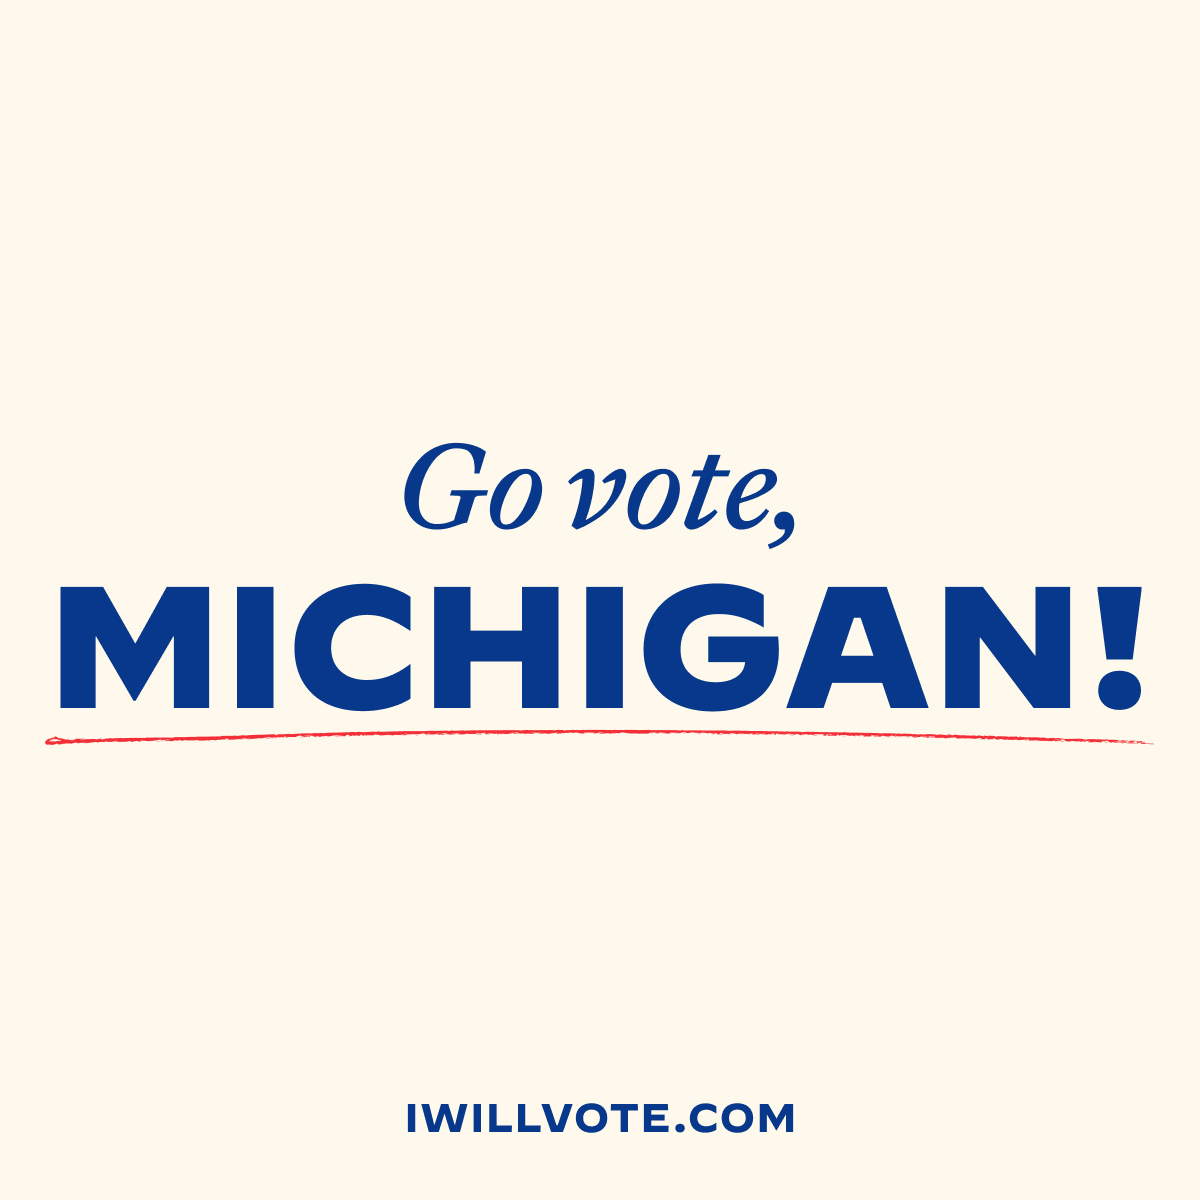 Michigan, it’s time to head to the polls! Every vote counts.

You have until 8pm local time to cast your ballot in the primary: https://t.co/Hy8C4mIL2M. 